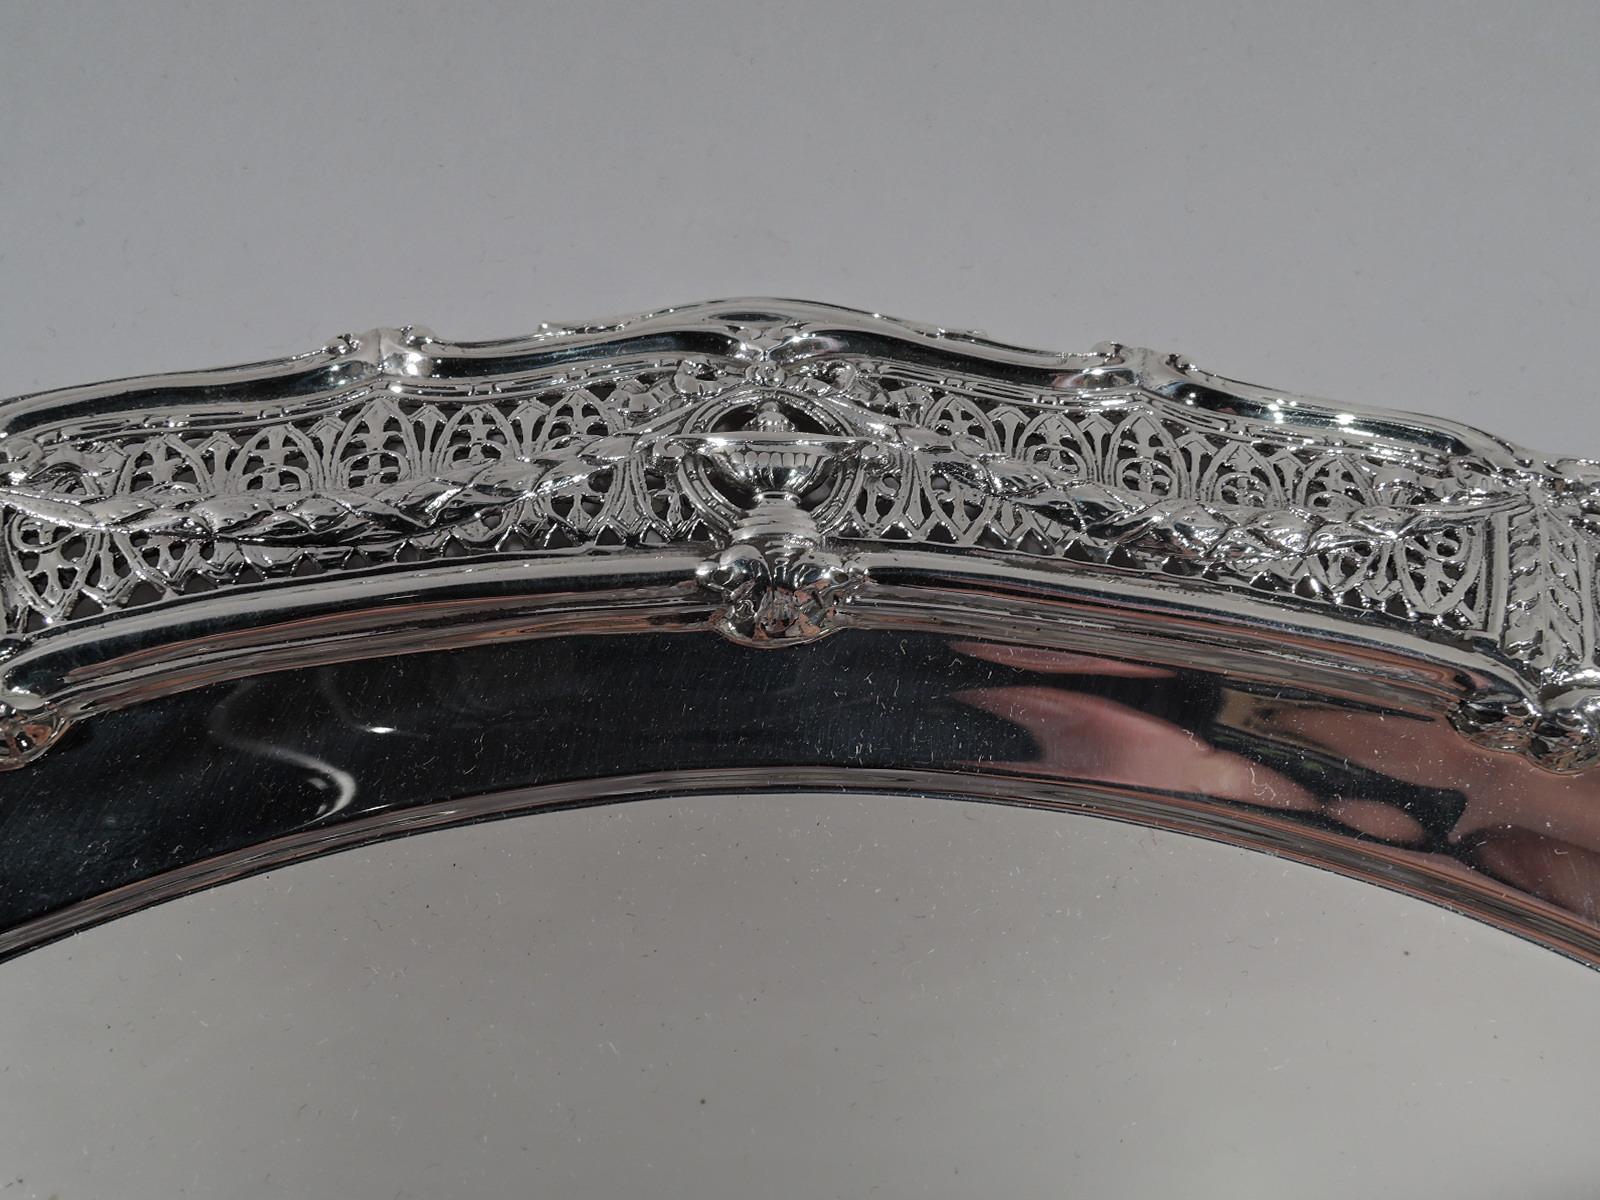 Edwardian Regency sterling silver tray in Adam. Made by Shreve & Co. in San Francisco, circa 1910. Plain well and wide shoulder with classical vases overlapping rondels joined by leaf swags on pierced fern ground. Ogee scroll rim. Fully marked and